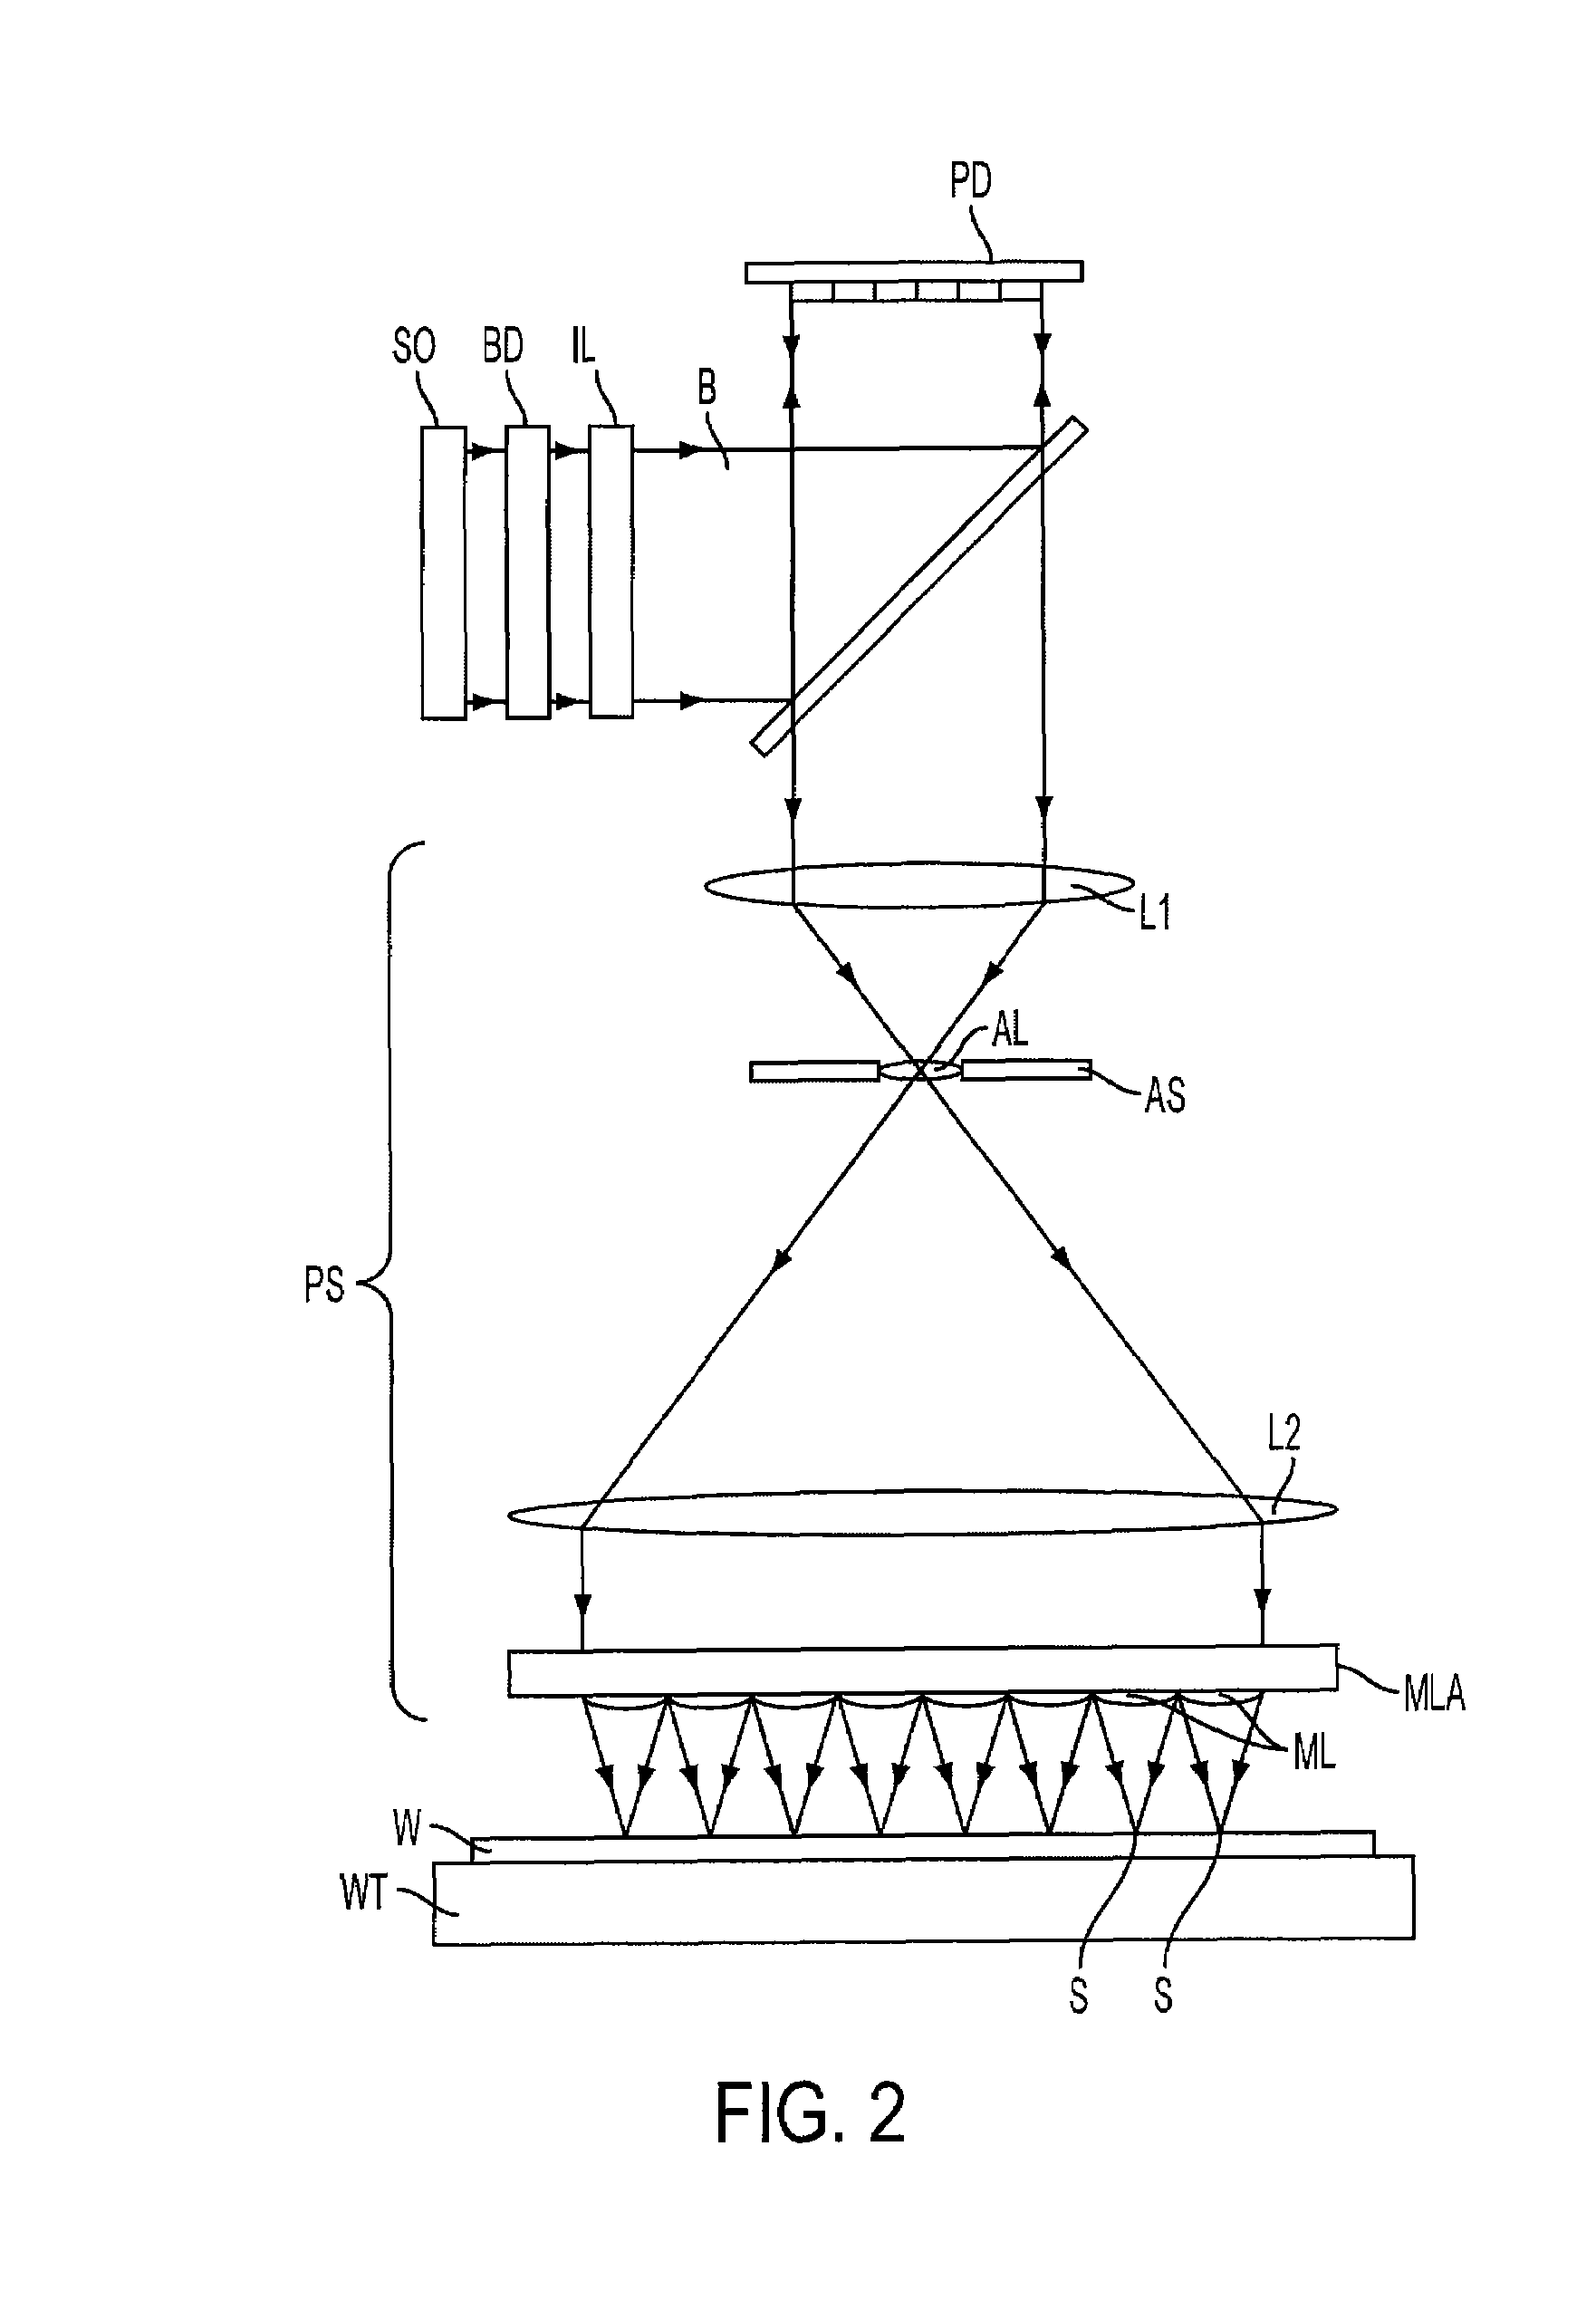 Catadioptric optical system for scatterometry